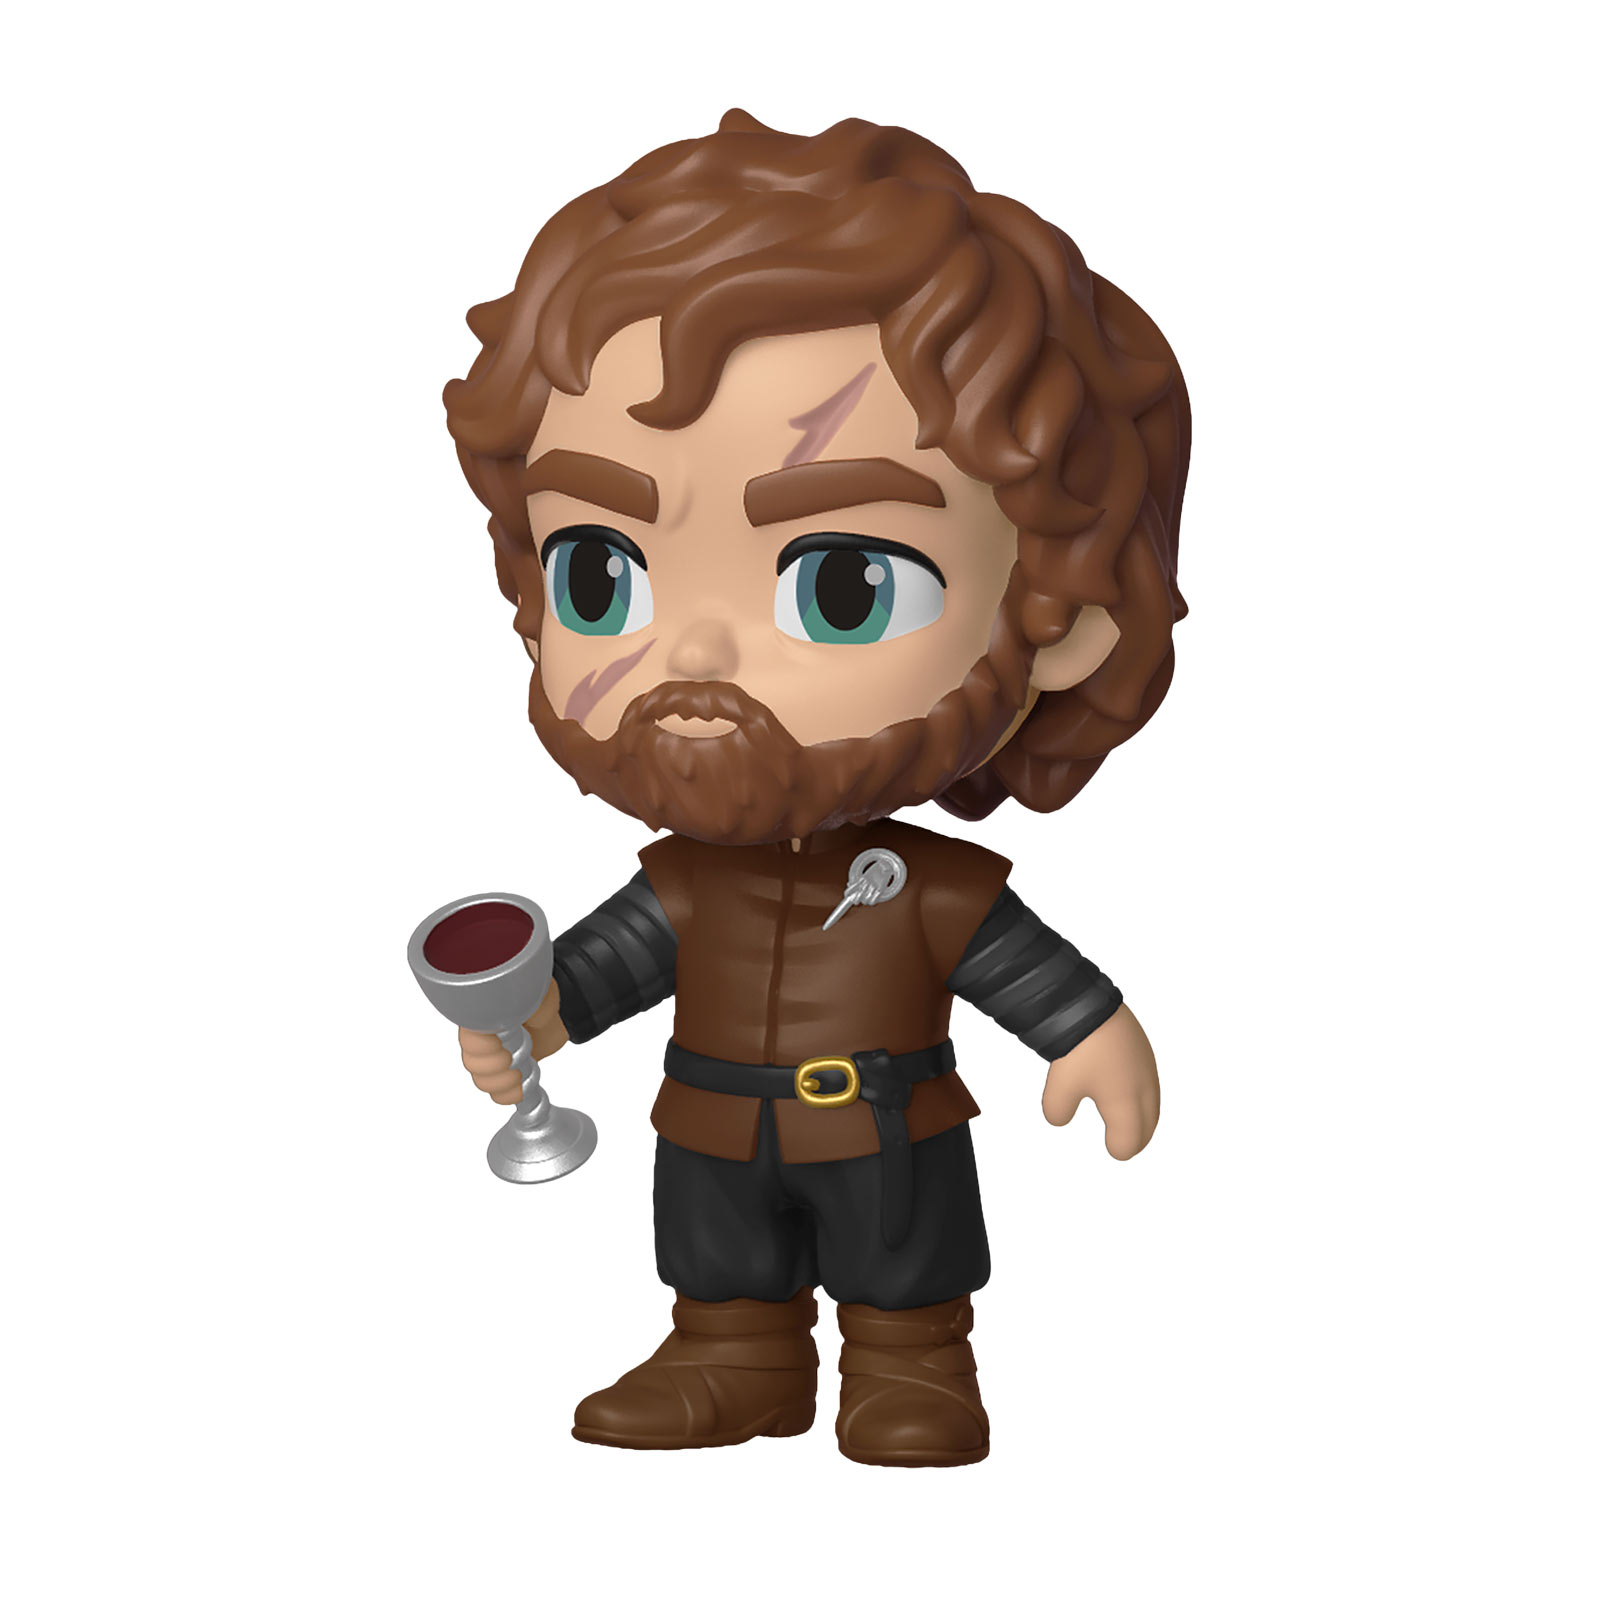 Game of Thrones - Tyrion Lannister Funko Five Star Figurine